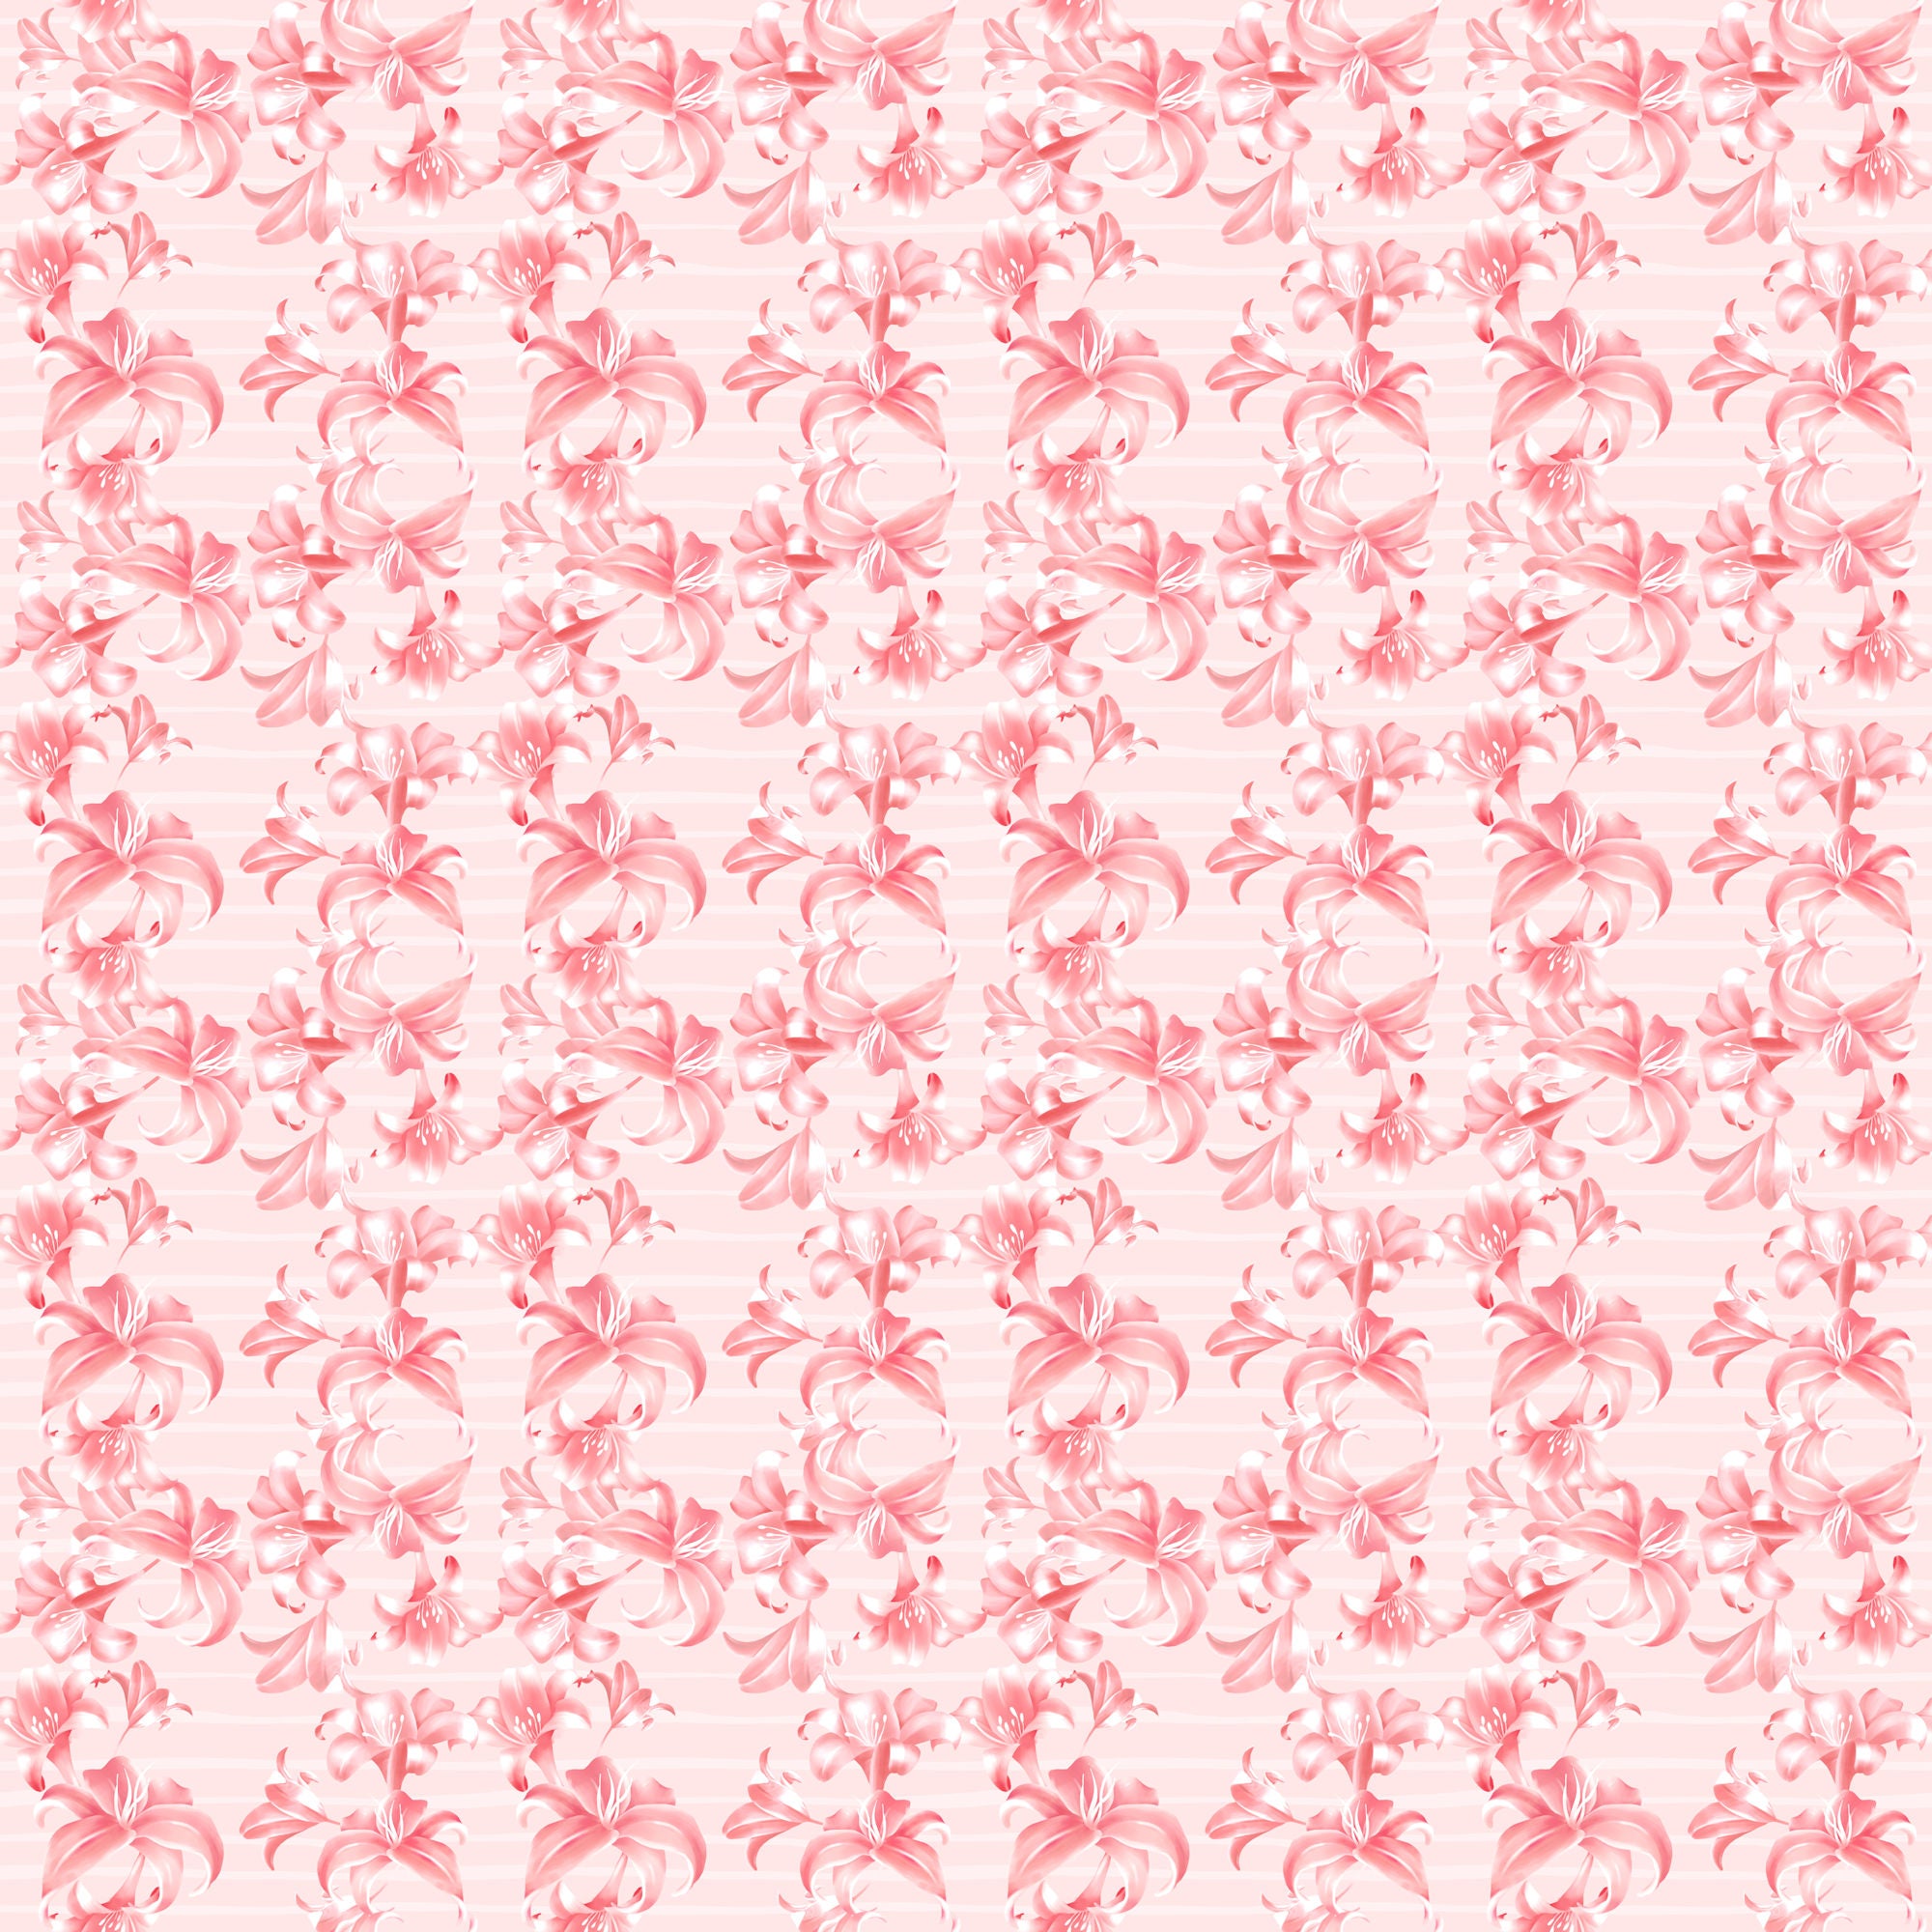 Nautical Summer Collection Floral Shells 12 x 12 Double-Sided Scrapbook Paper by SSC Designs